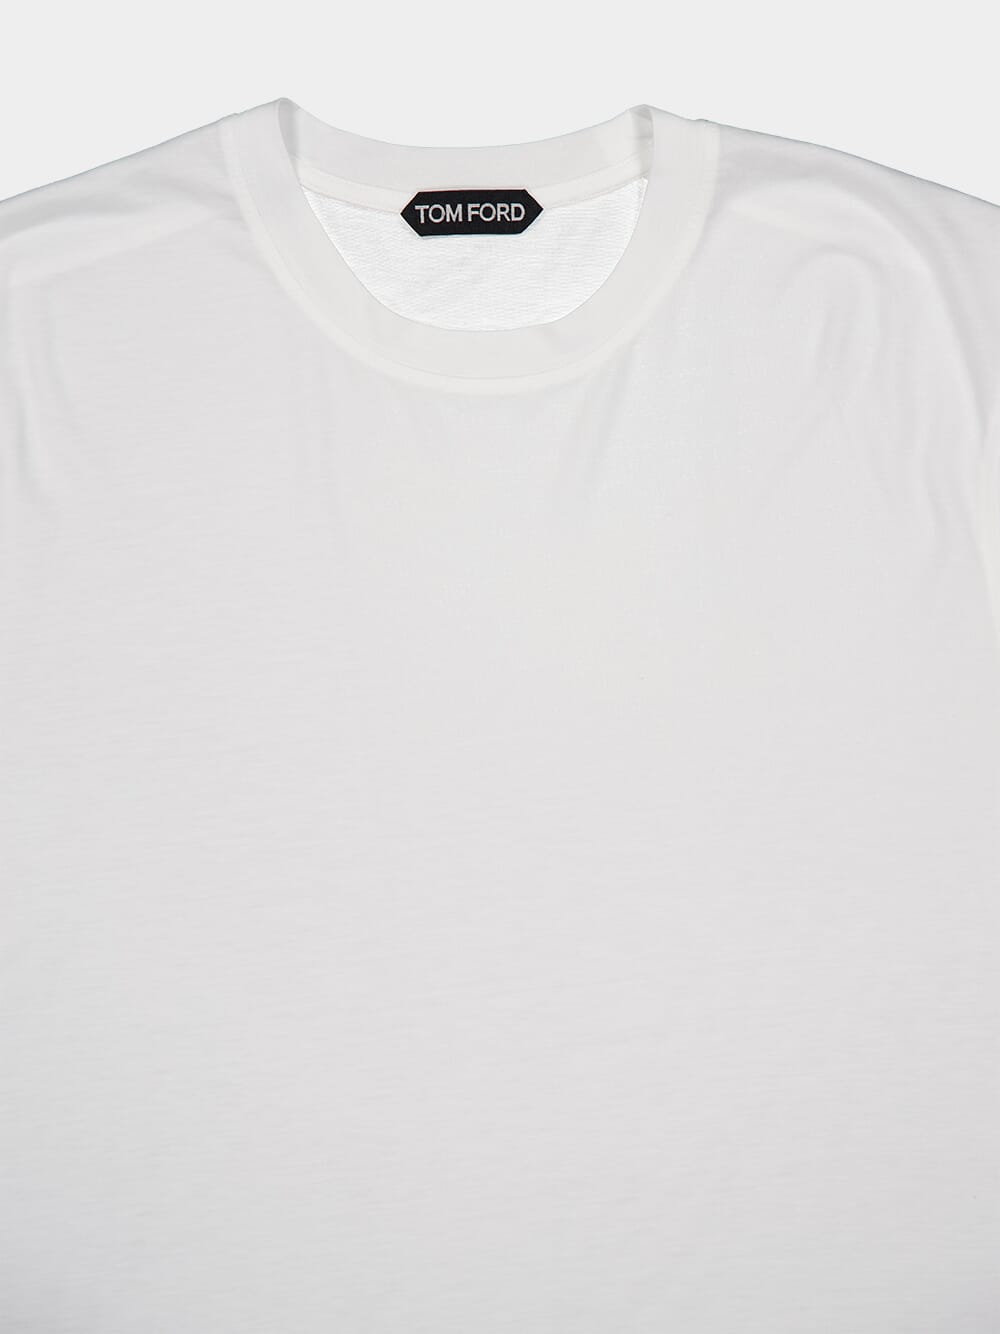 Tom FordLyocell-Cotton White Tee at Fashion Clinic